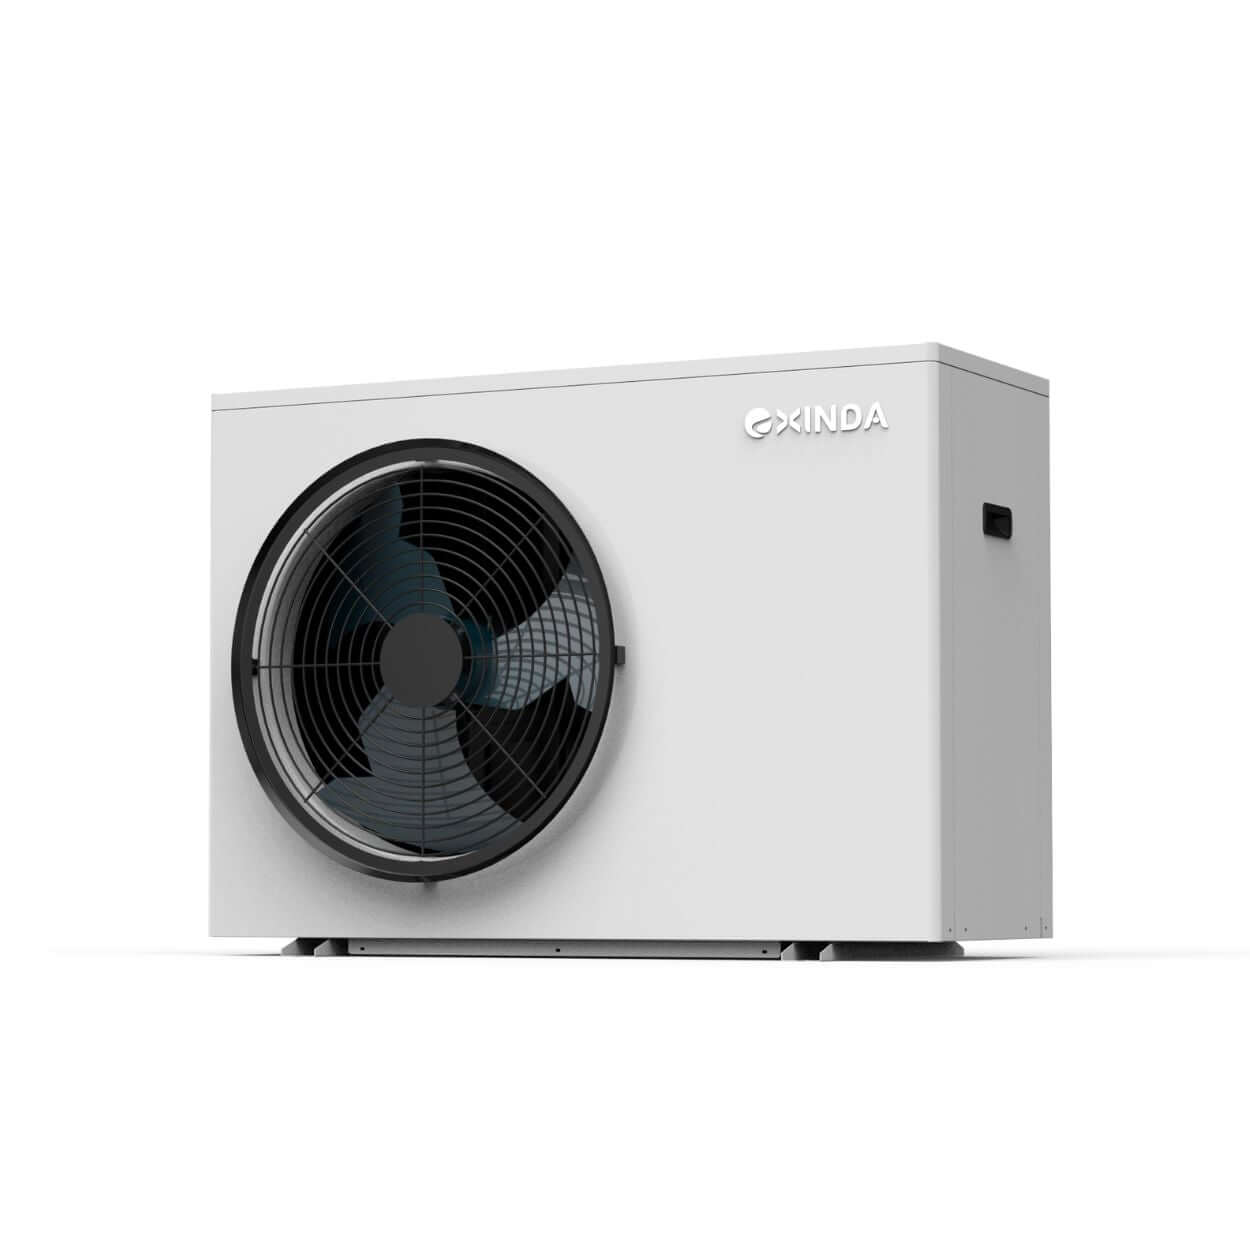 EXINDAResidential Air to Water Heat PumpResidential R290 Inverter Air to Water Heat Pump